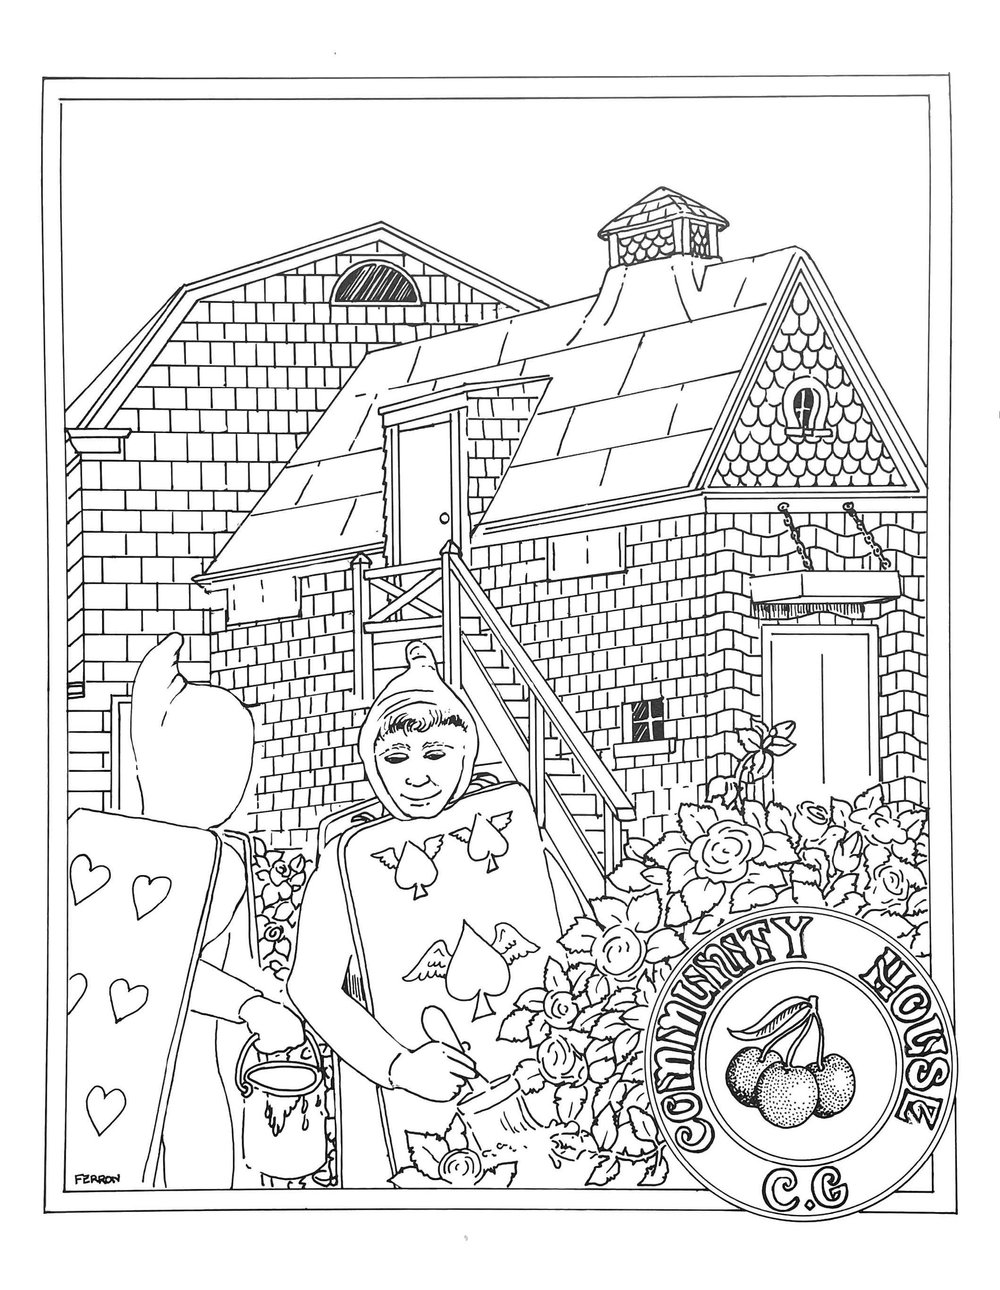 Fire Island Coloring Pad_Page_05.jpg